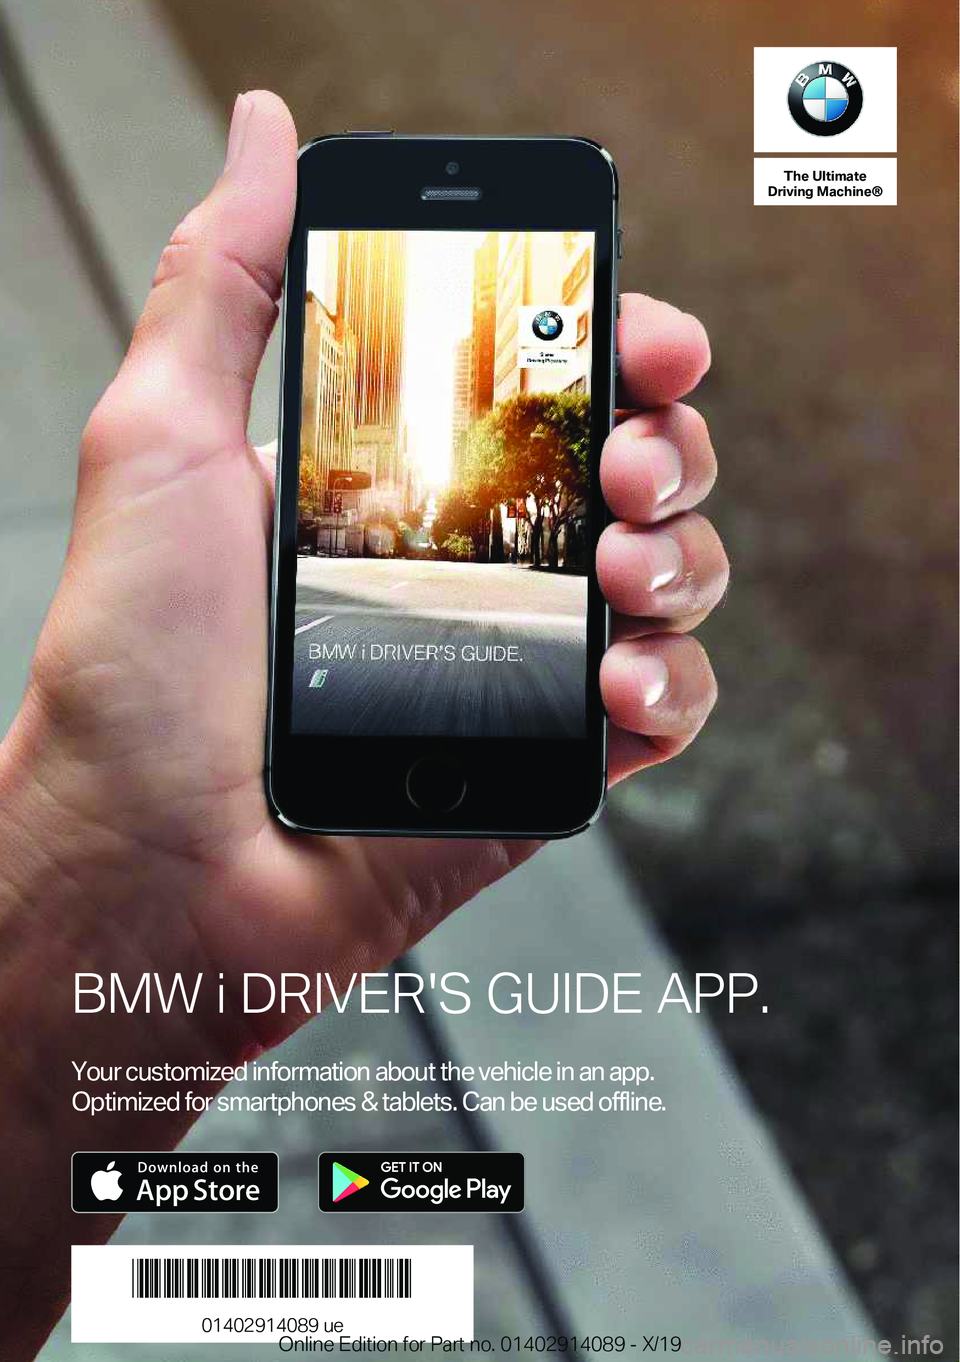 BMW I8 2020  Owners Manual �T�h�e��U�l�U�i�m�B�U�e
�D�S�i�W�i�n�g��M�B�c�h�i�n�e�n
�B�M�W��i��D�R�I�V�E�R�'�S��G�U�I�D�E��A�P�P�.
�:�o�u�r��c�u�s�t�o�m�i�[�e�d��i�n�f�o�r�m�a�t�i�o�n��a�b�o�u�t��t�h�e��v�e�h�i�c�